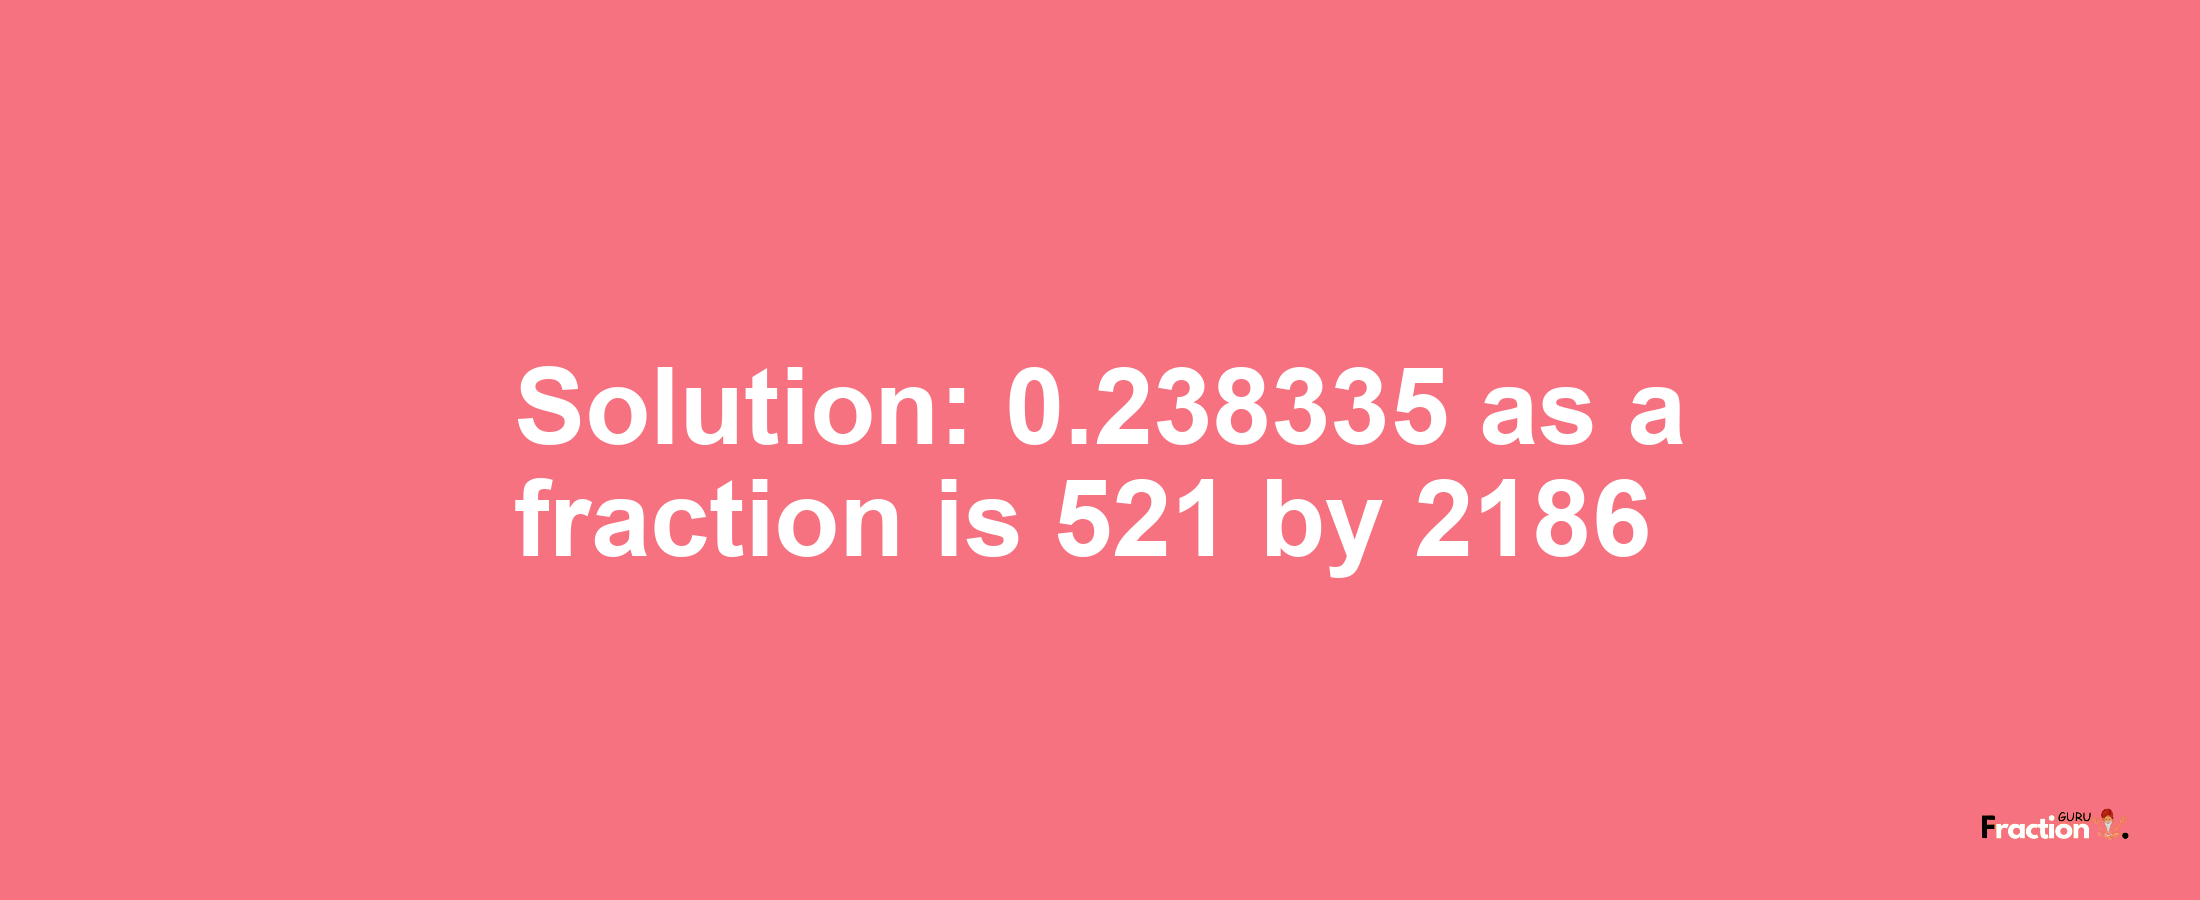 Solution:0.238335 as a fraction is 521/2186